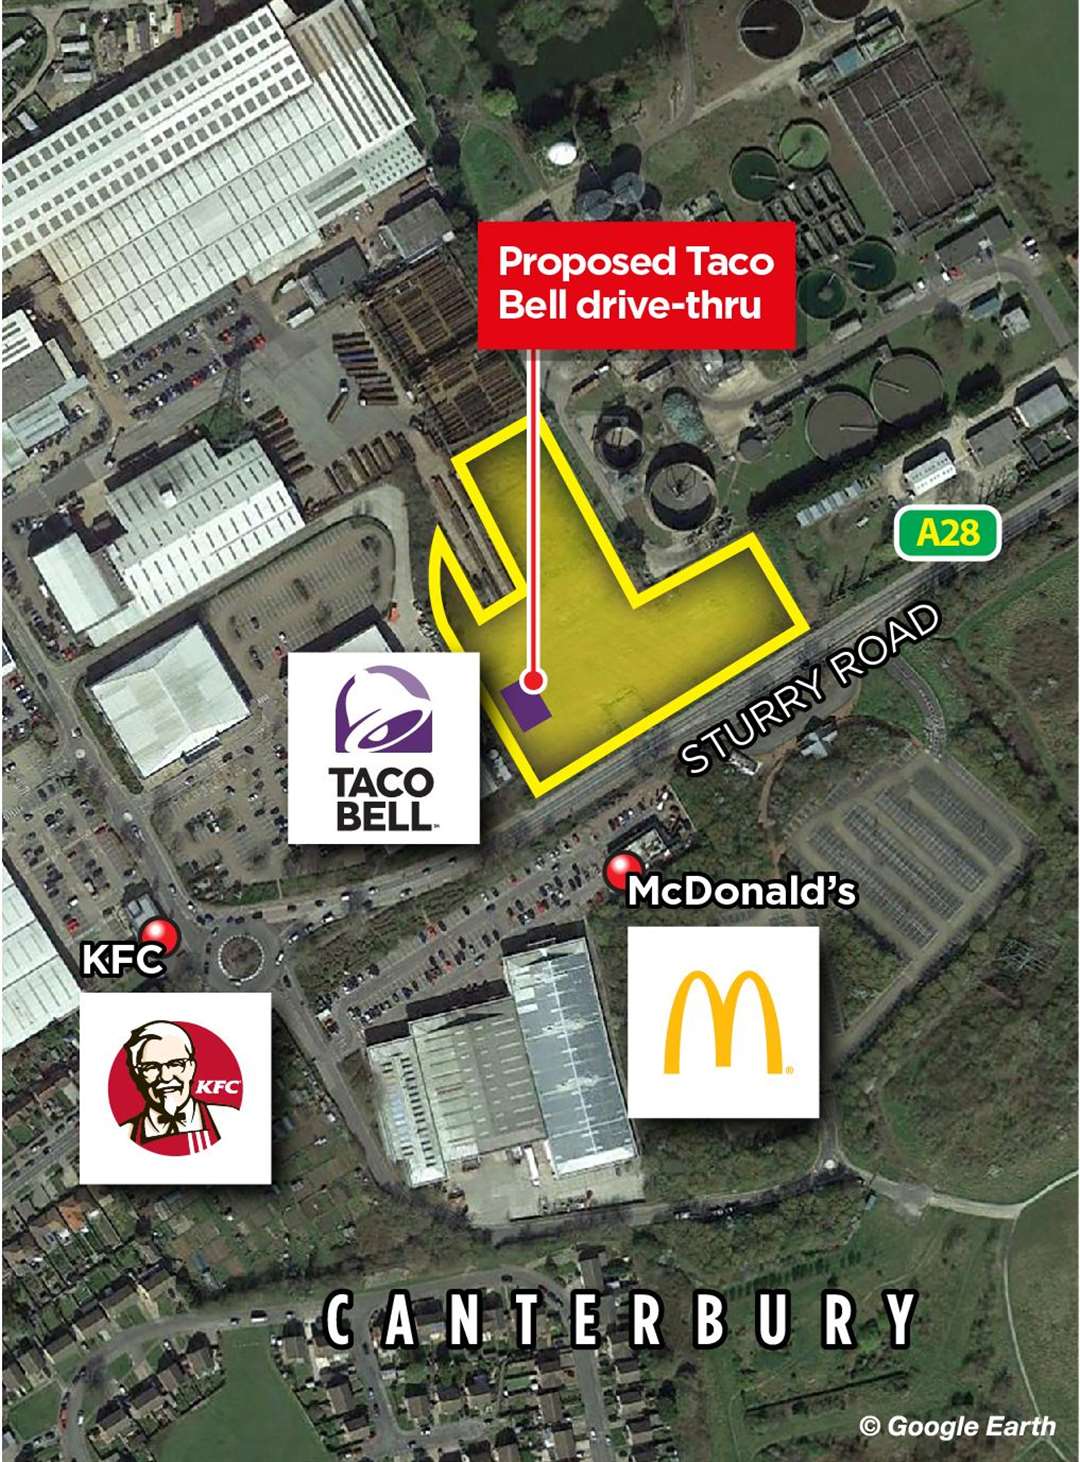 The Taco Bell will located near to branches of KFC and McDonald’s in Sturry Road, Canterbury